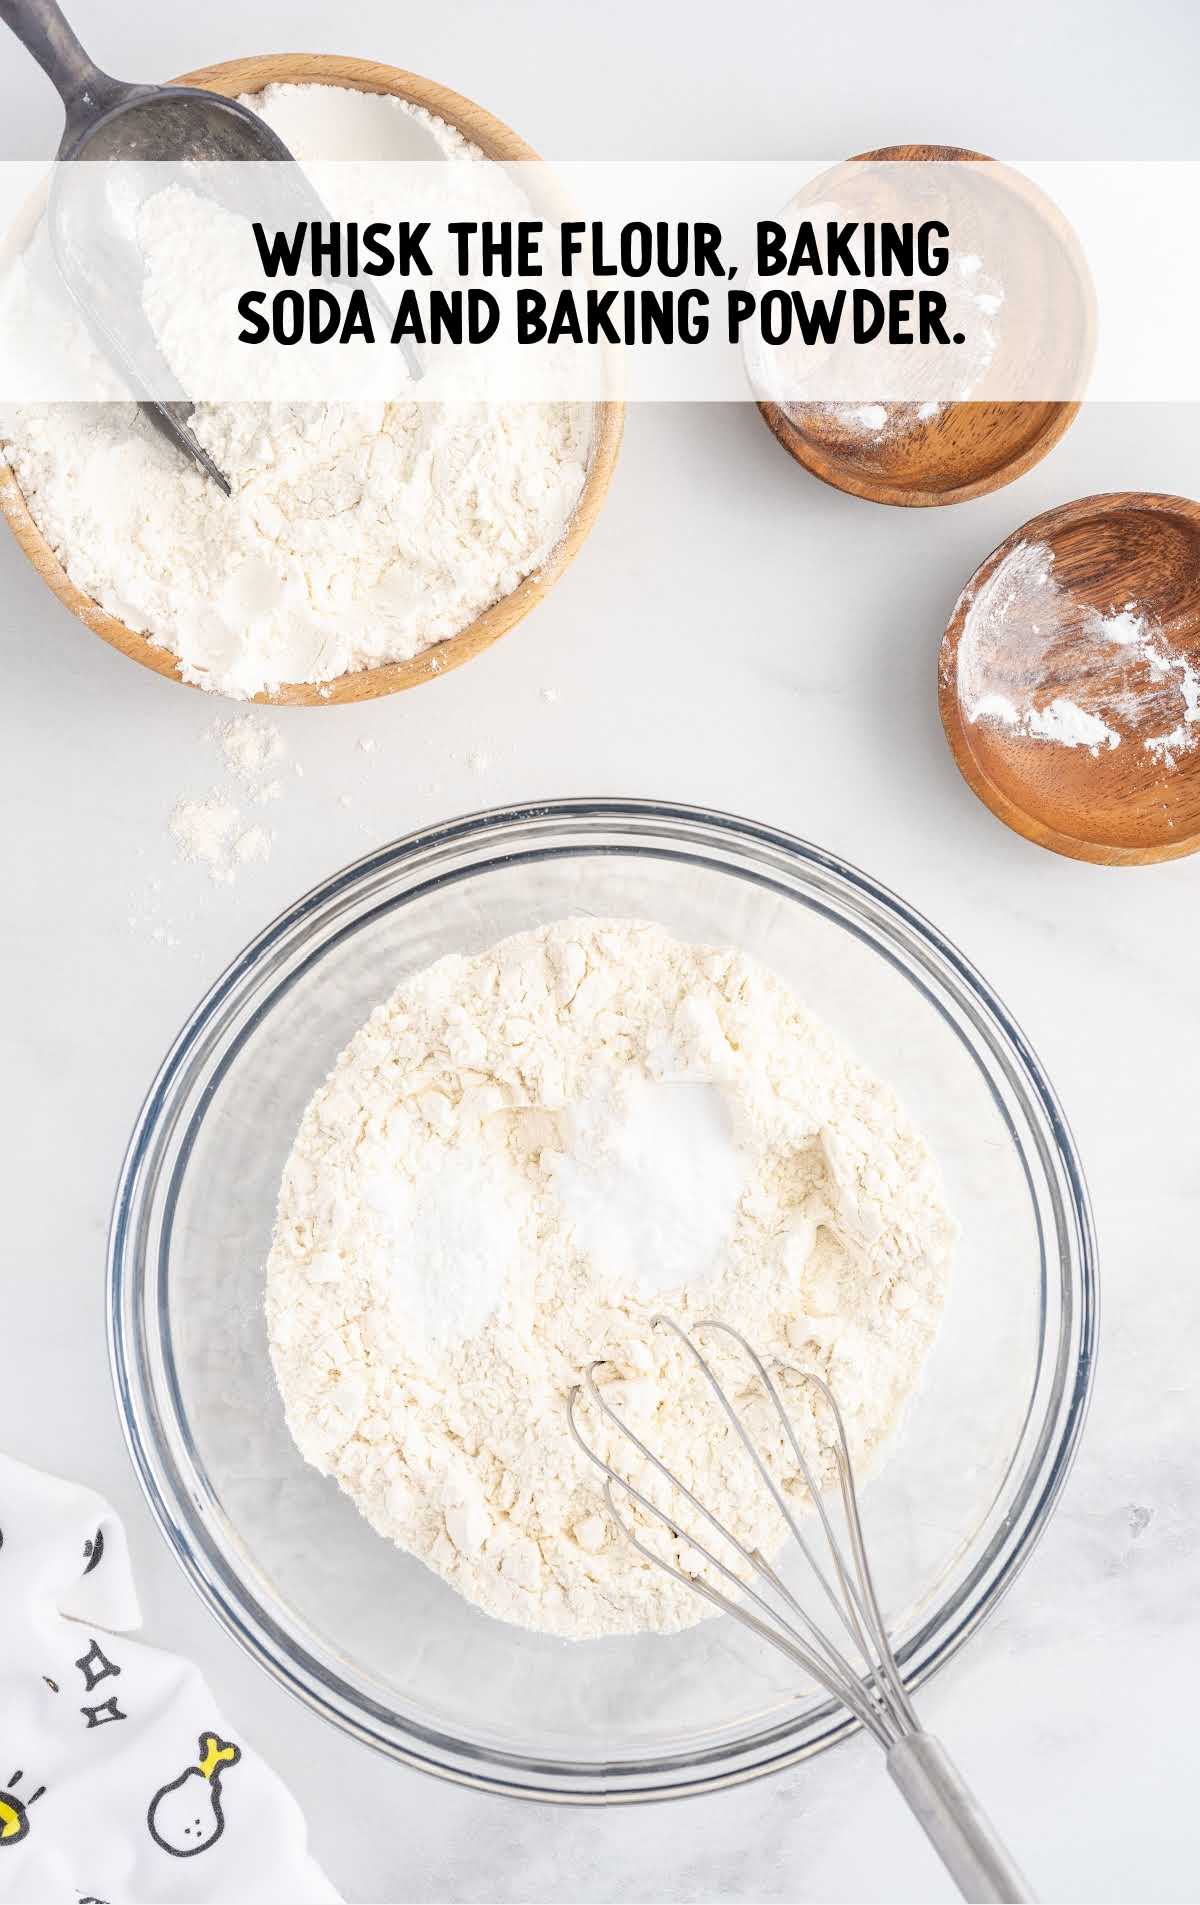 flour, baking soda, and baking powder whisked together in a bowl